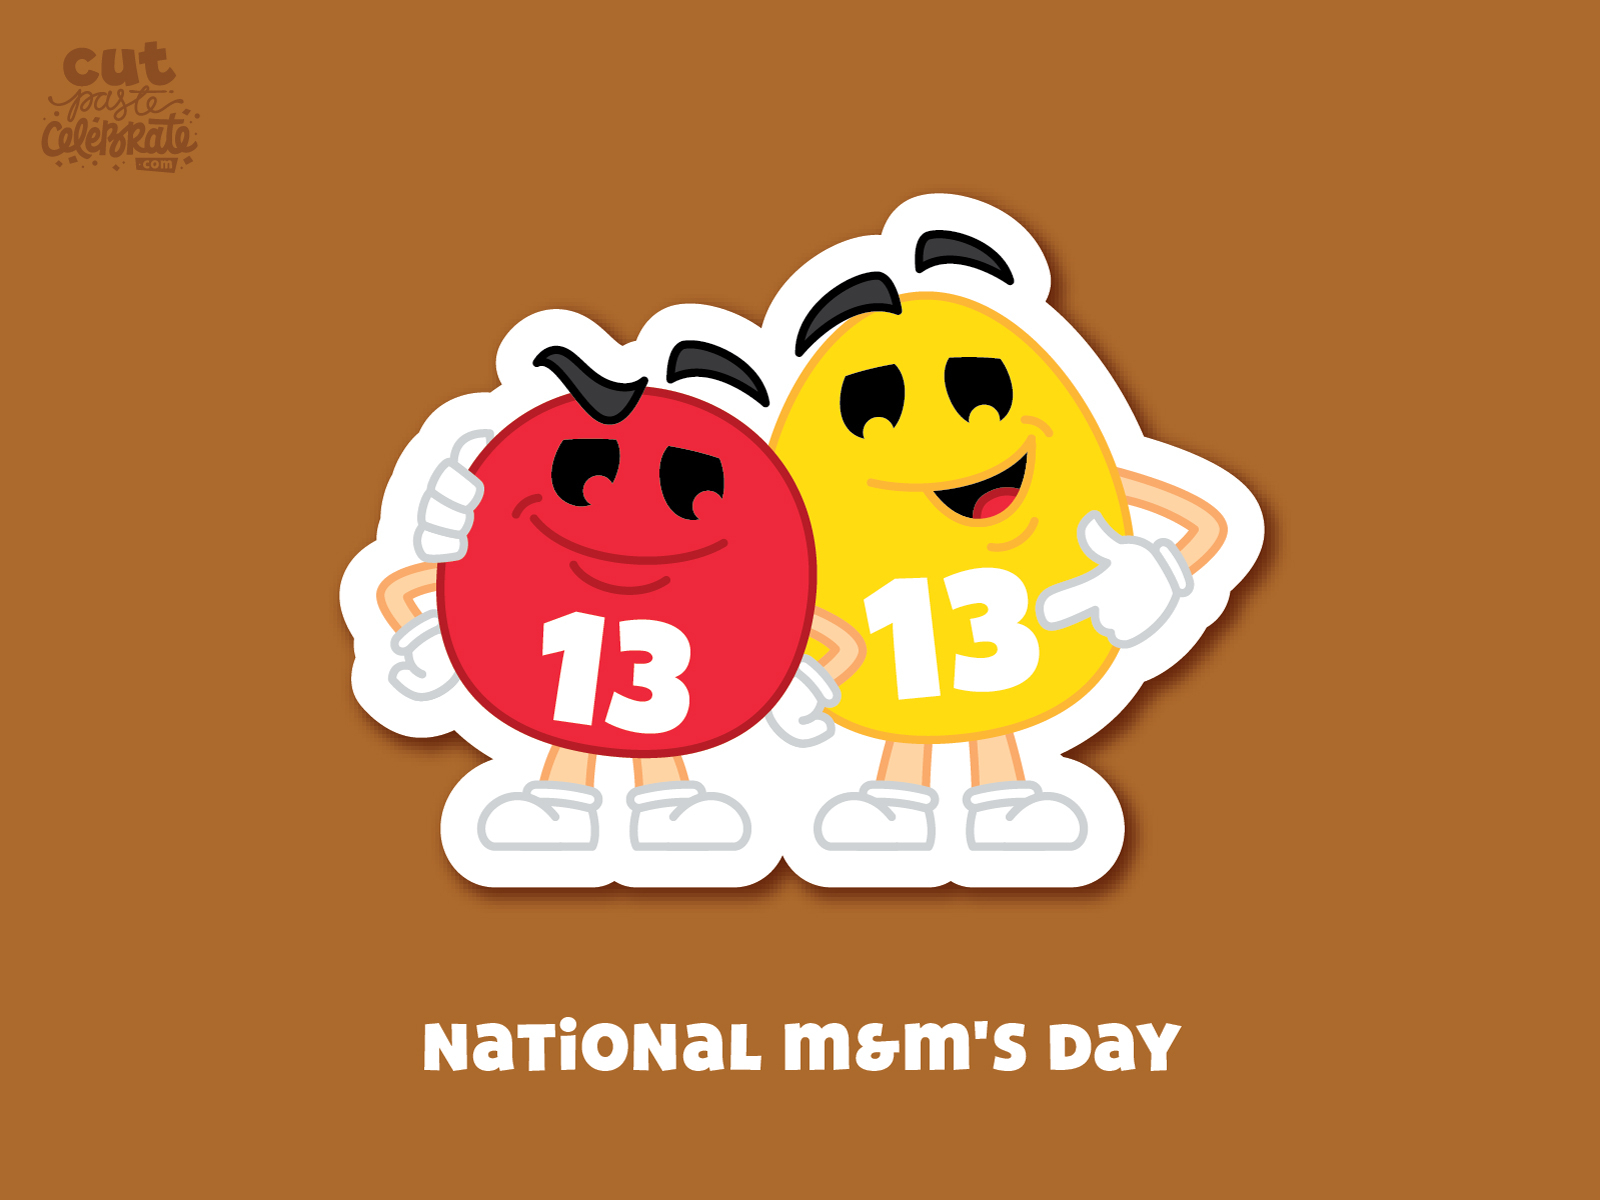 October 13 National M&M's Day by Curt R. Jensen on Dribbble